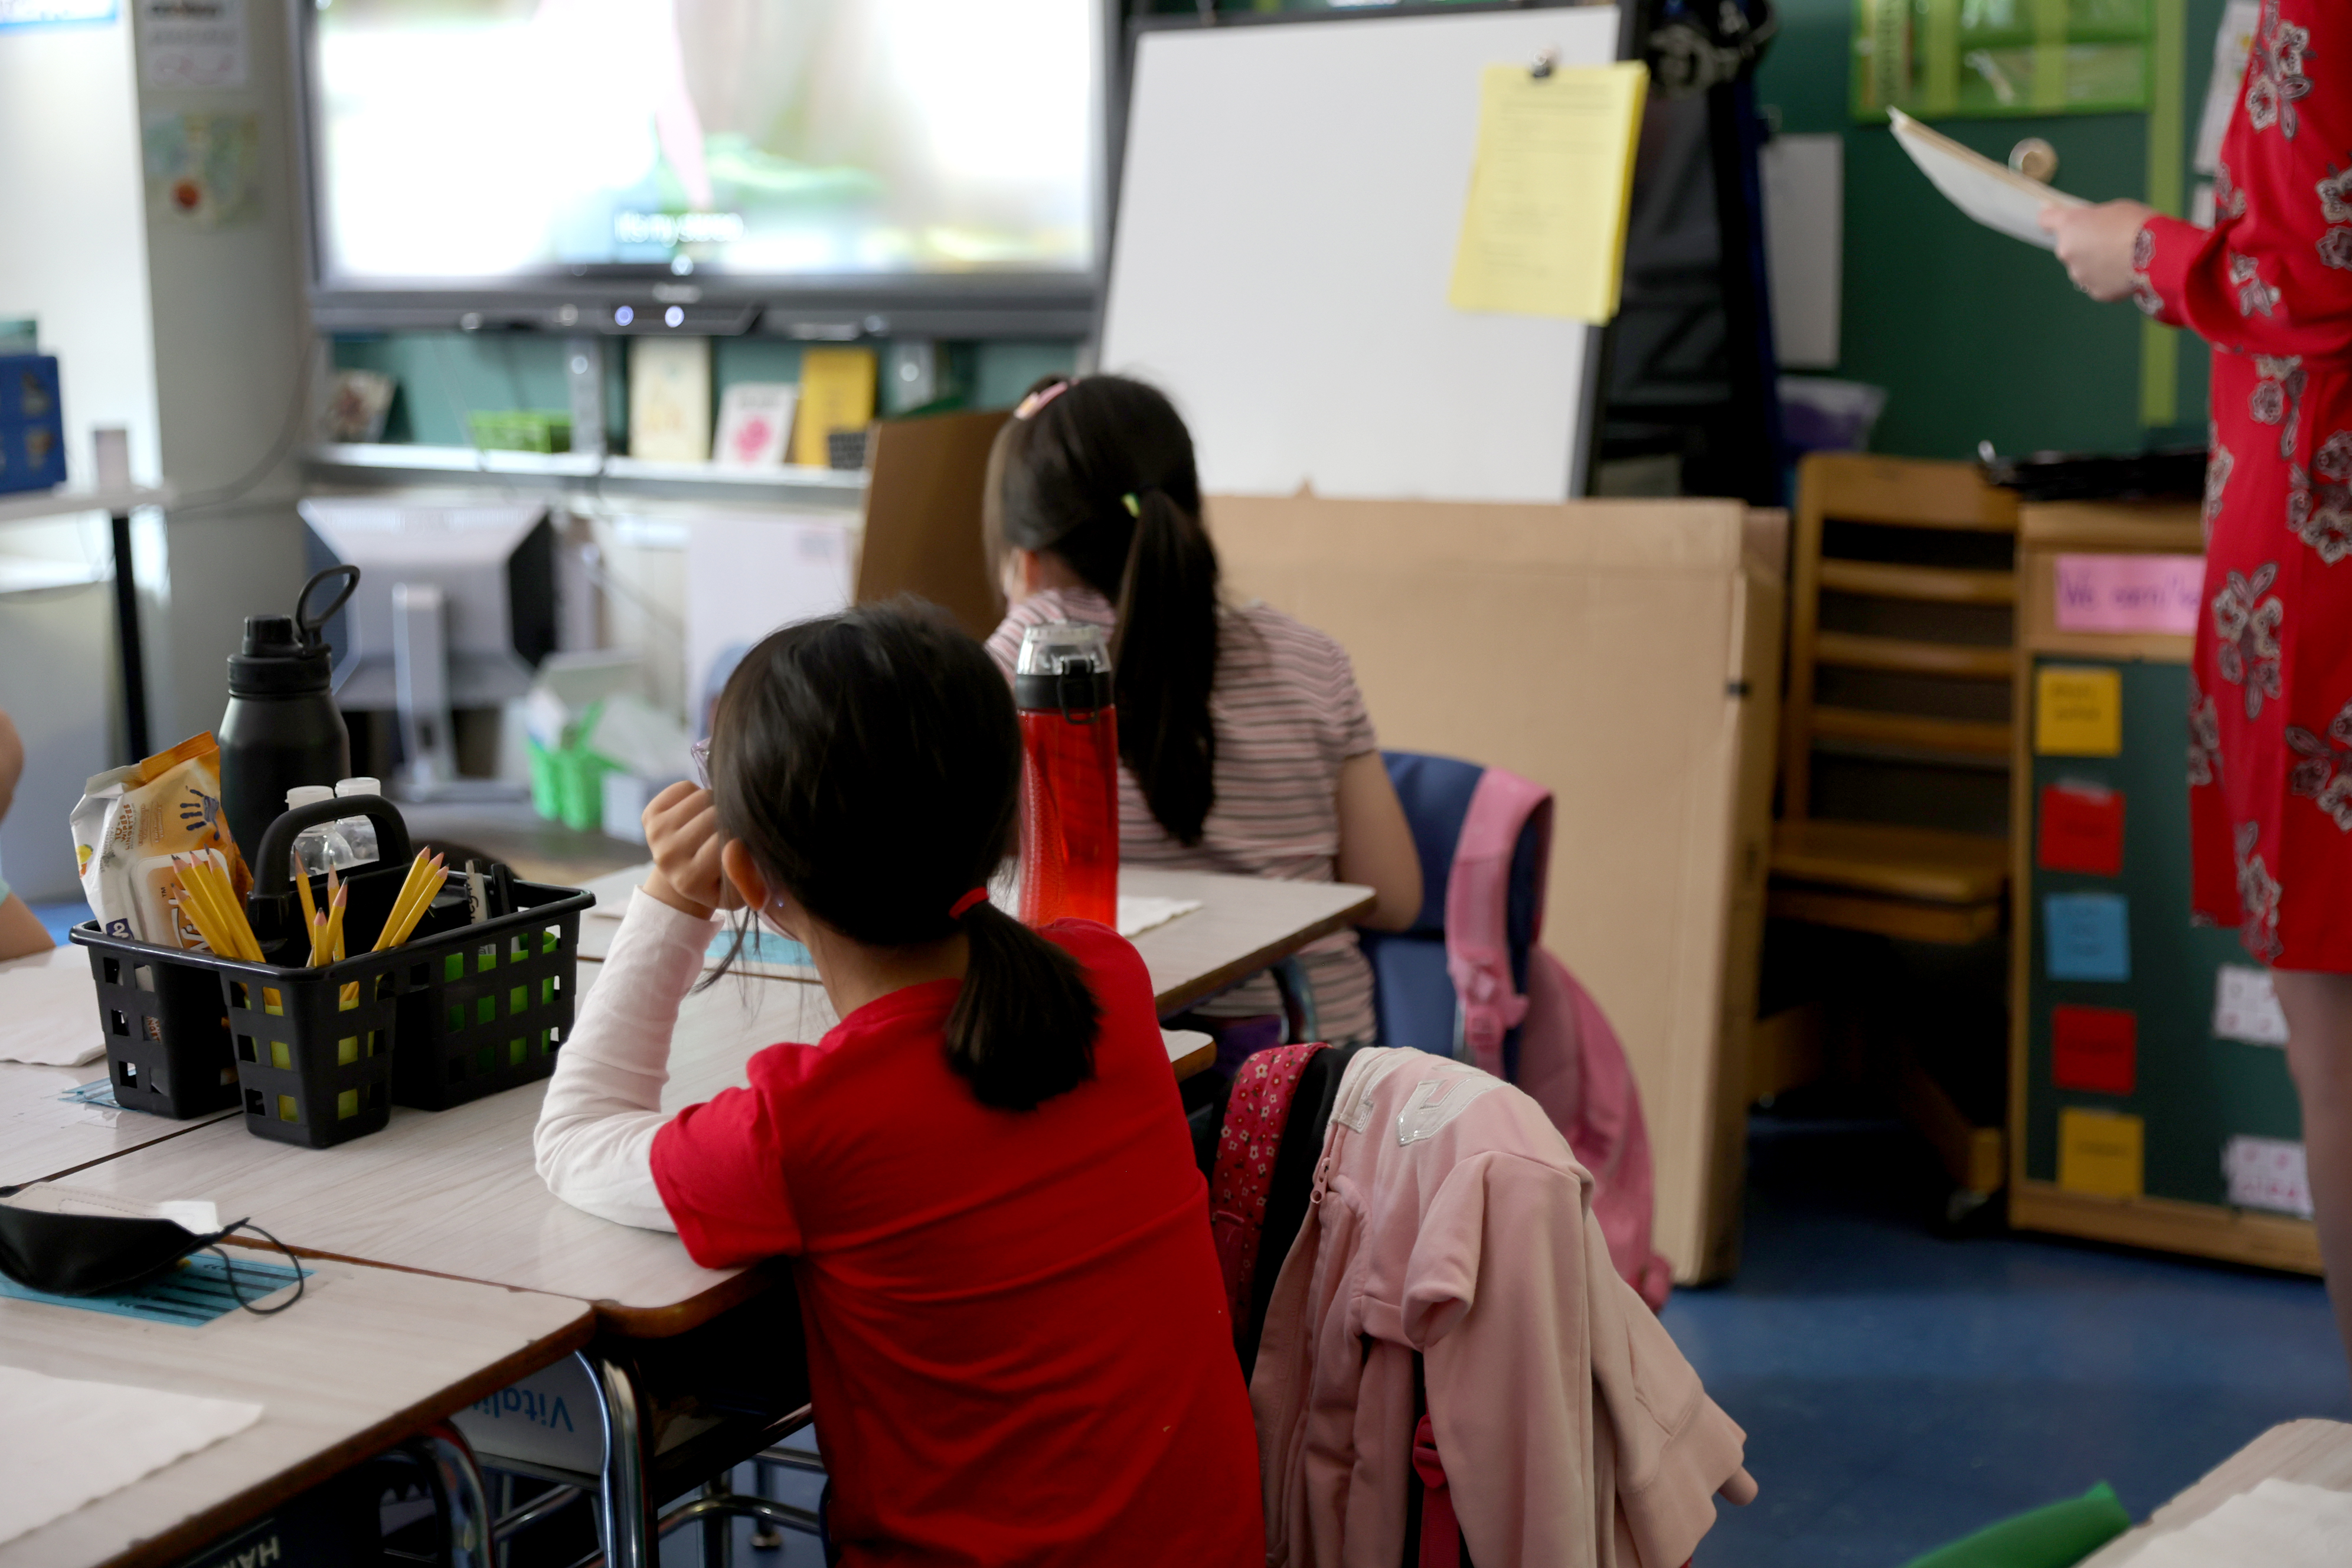 Students attend class at Yung Wing School P.S. 124 in New York City on June 24, 2022. (Michael Loccisano–Getty Images)